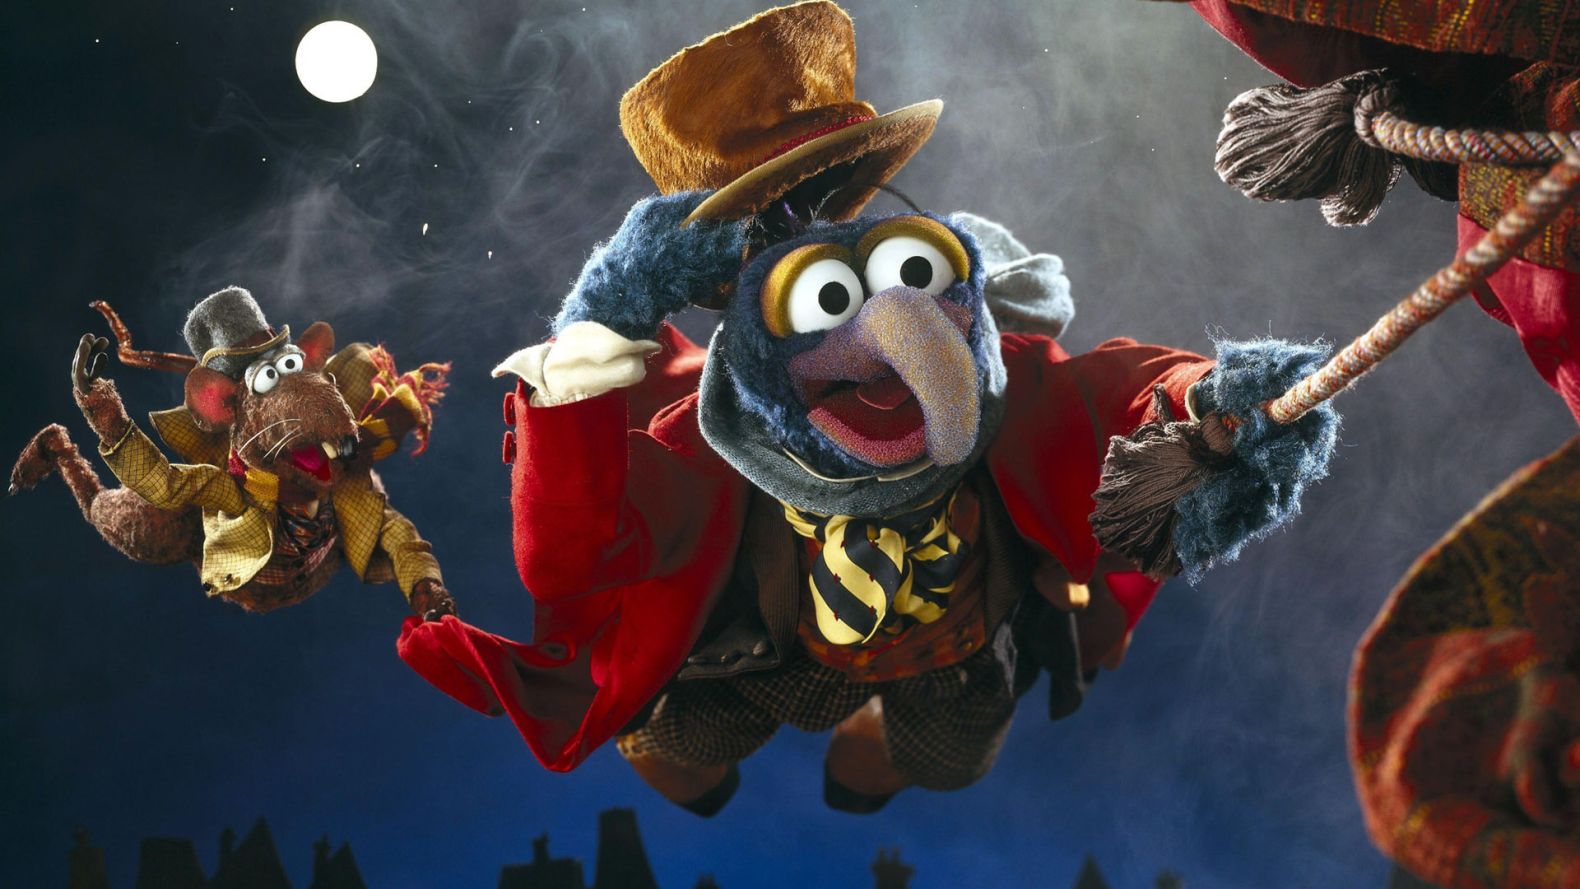 The Muppet Christmas Carol: Rizzo the Rat holding Gonzo's coat as they swing through the night sky